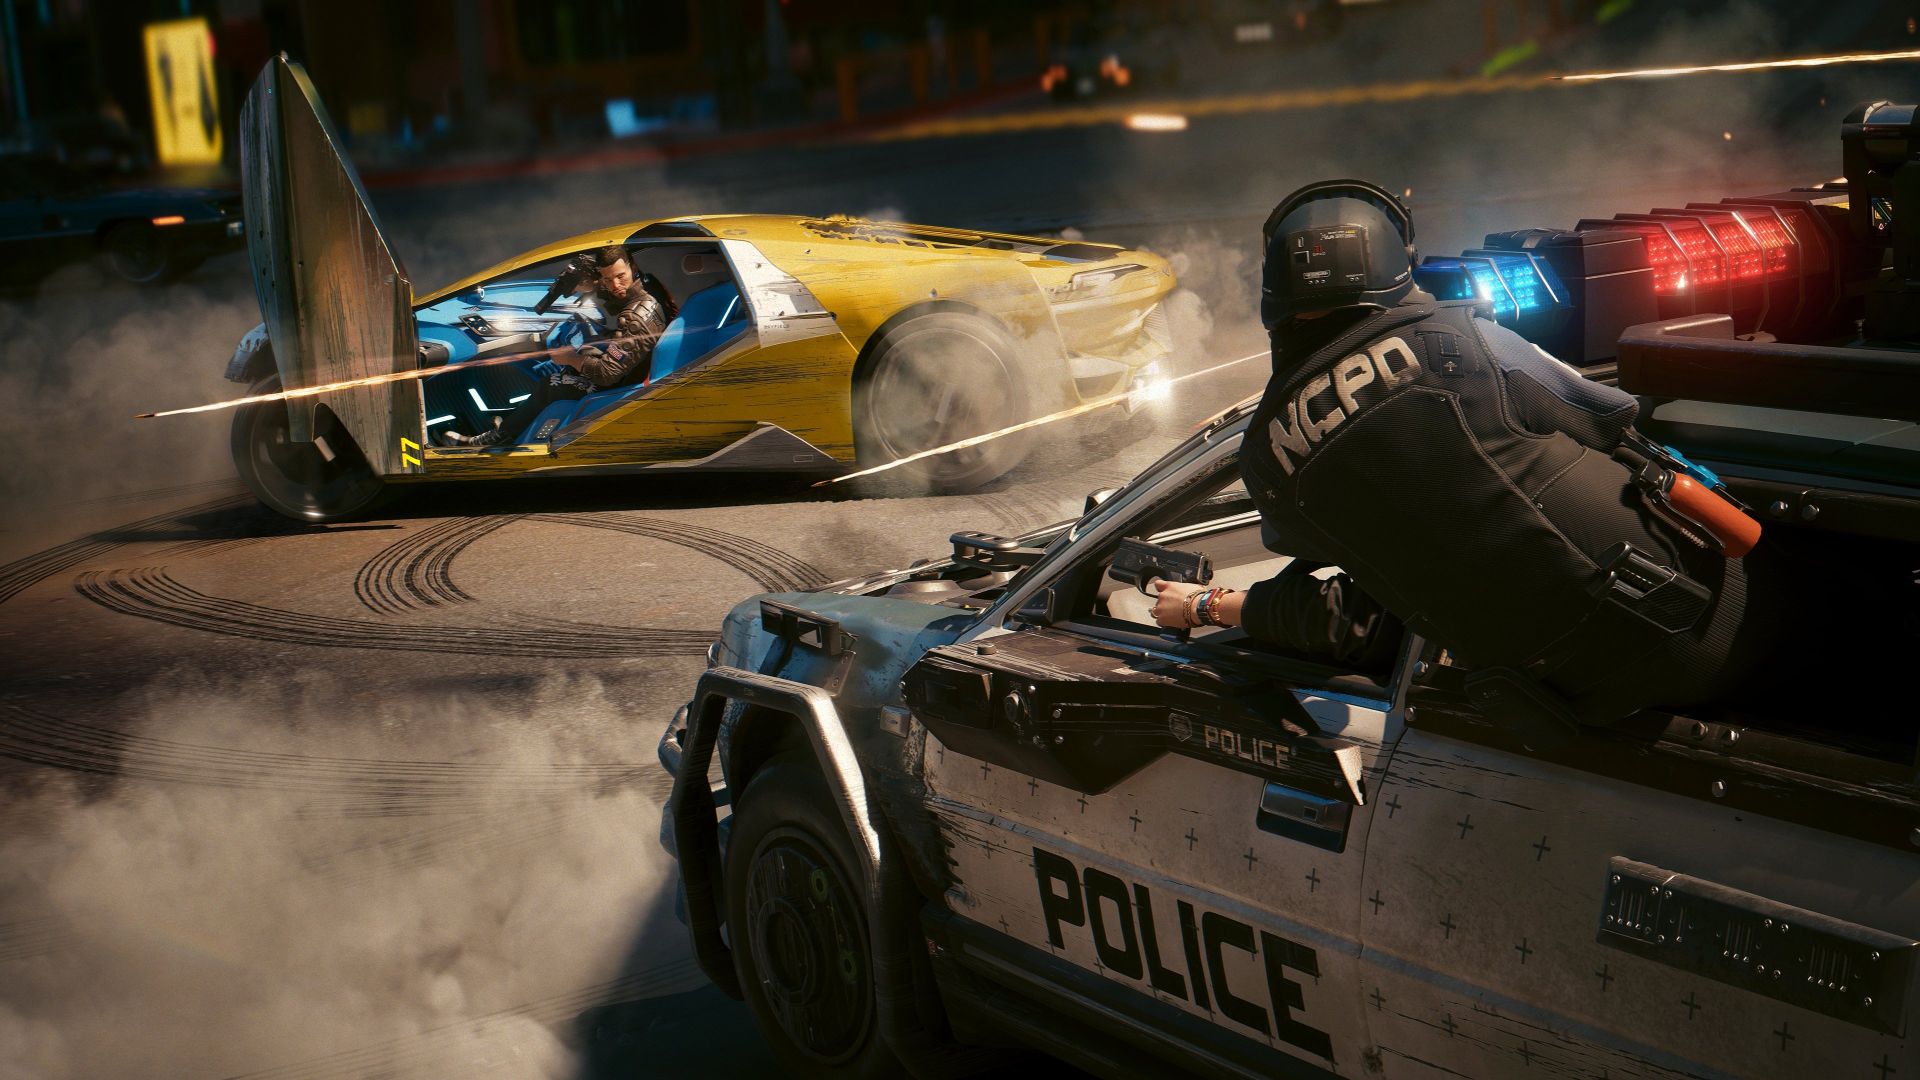 Cyberpunk 2077 Update 2.0 is Now Out, Full Patch Notes Released